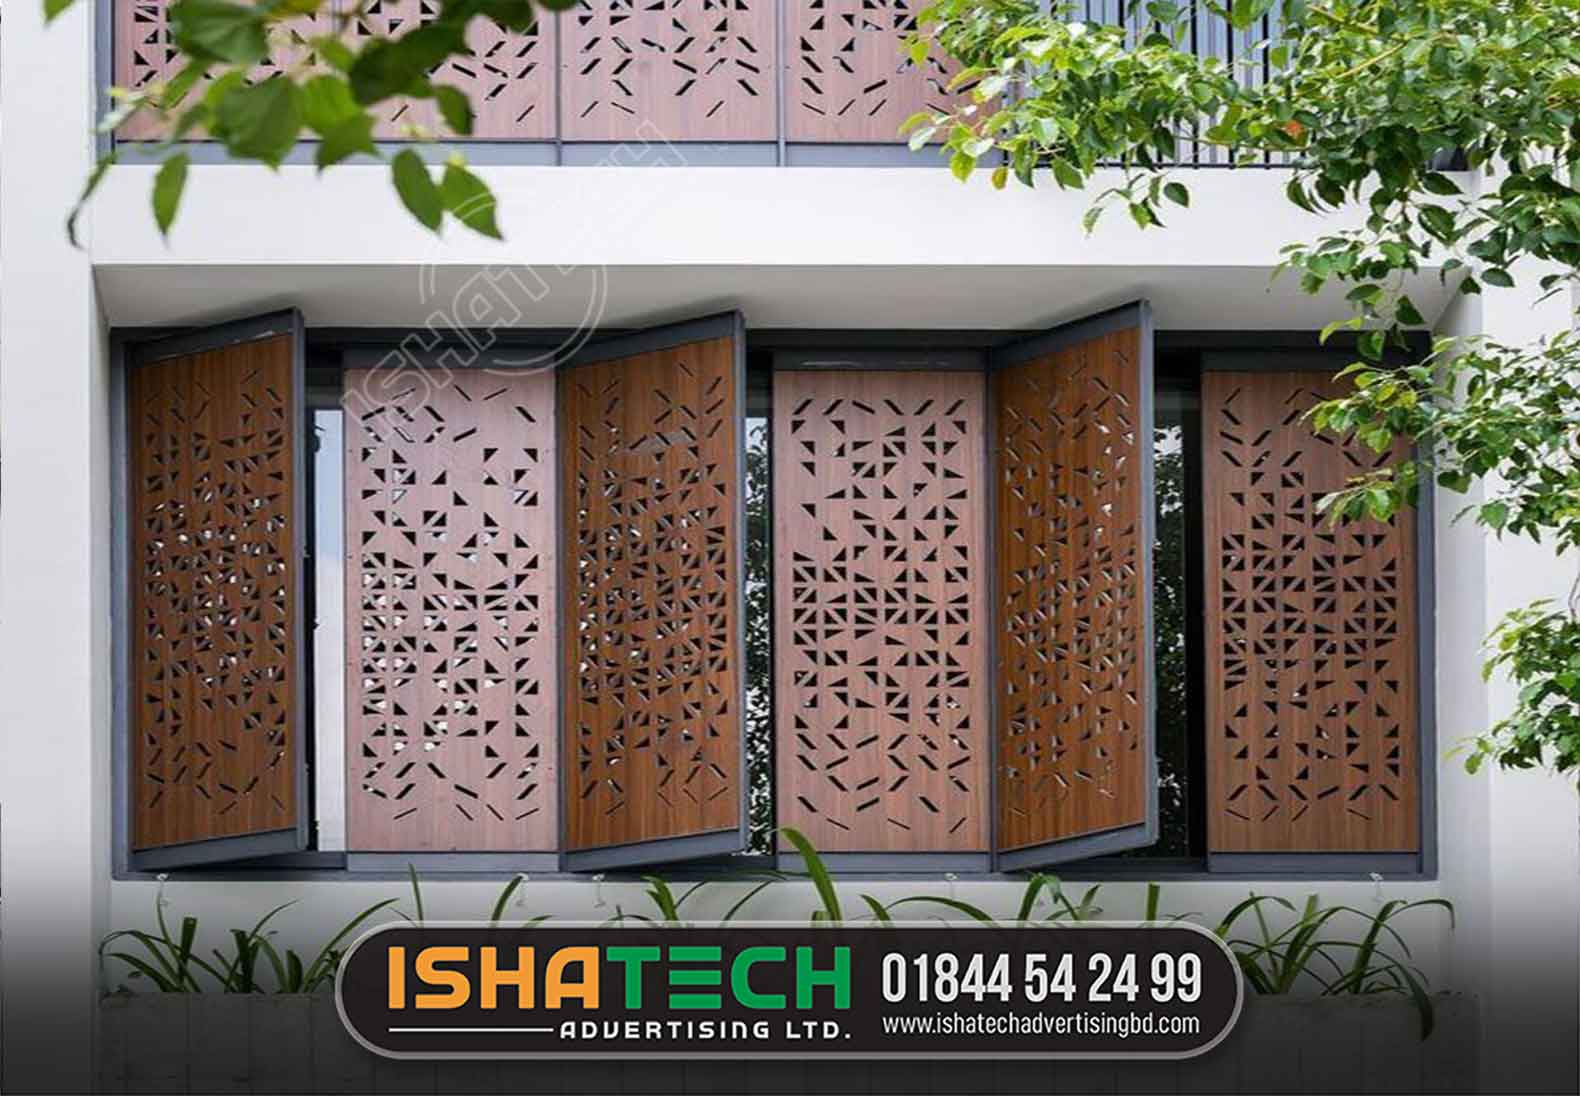 Metal perforated panels, steel plates, Marble & Gypsum, 3D panels, wood mashrabiya. Laser cutting services & Cnc router cutting services.